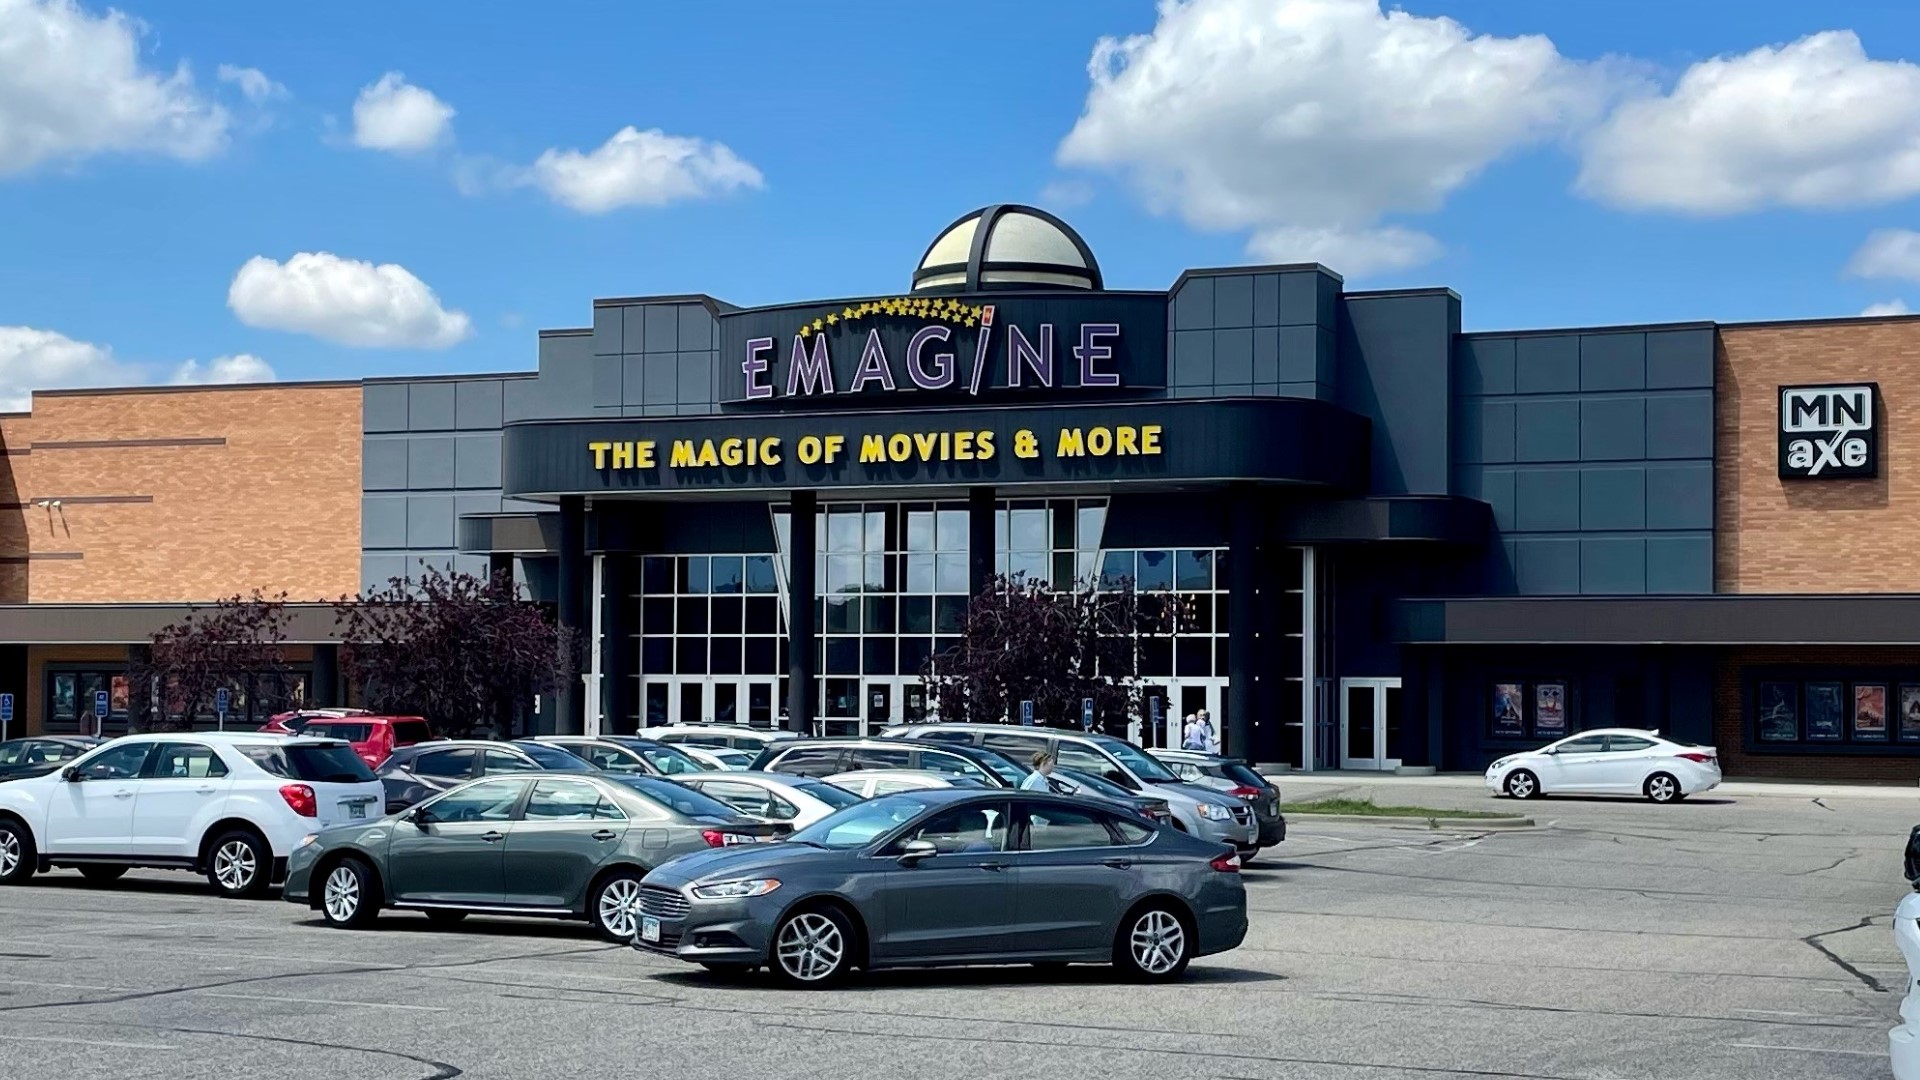 On Tuesday night, officers were called out to Emagine Theater on Cliff Road on a report of a firework being set off in the theater.